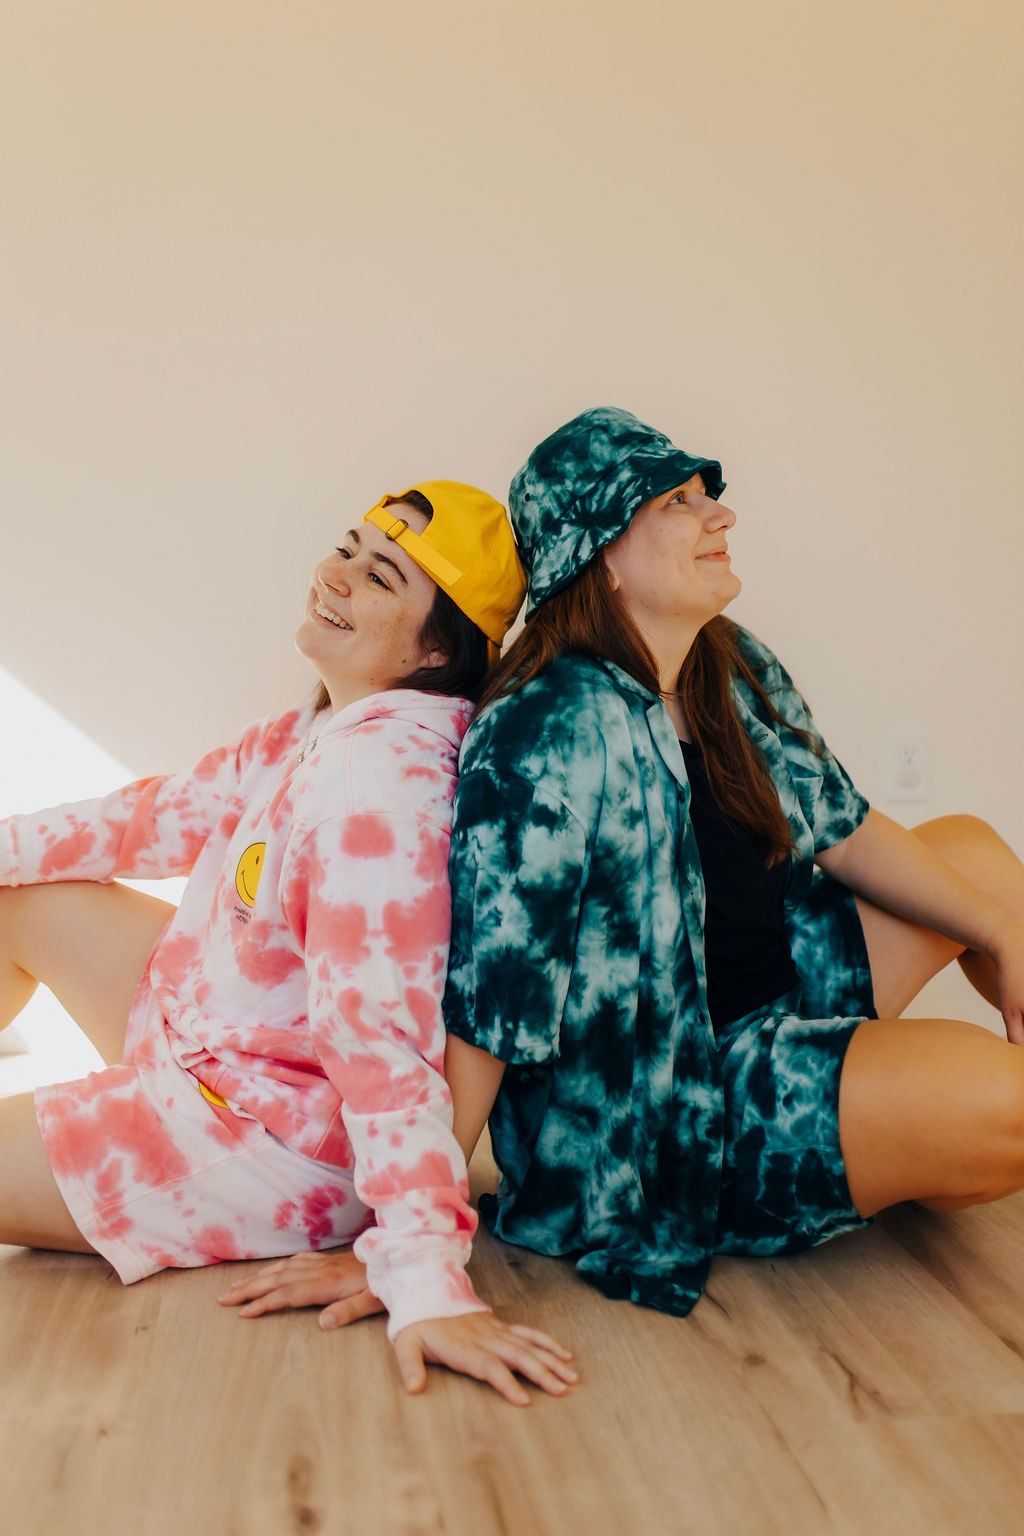 Two girls sit back to back on the floor in tie dye clothing. They are the designers behind the best Showit websites.